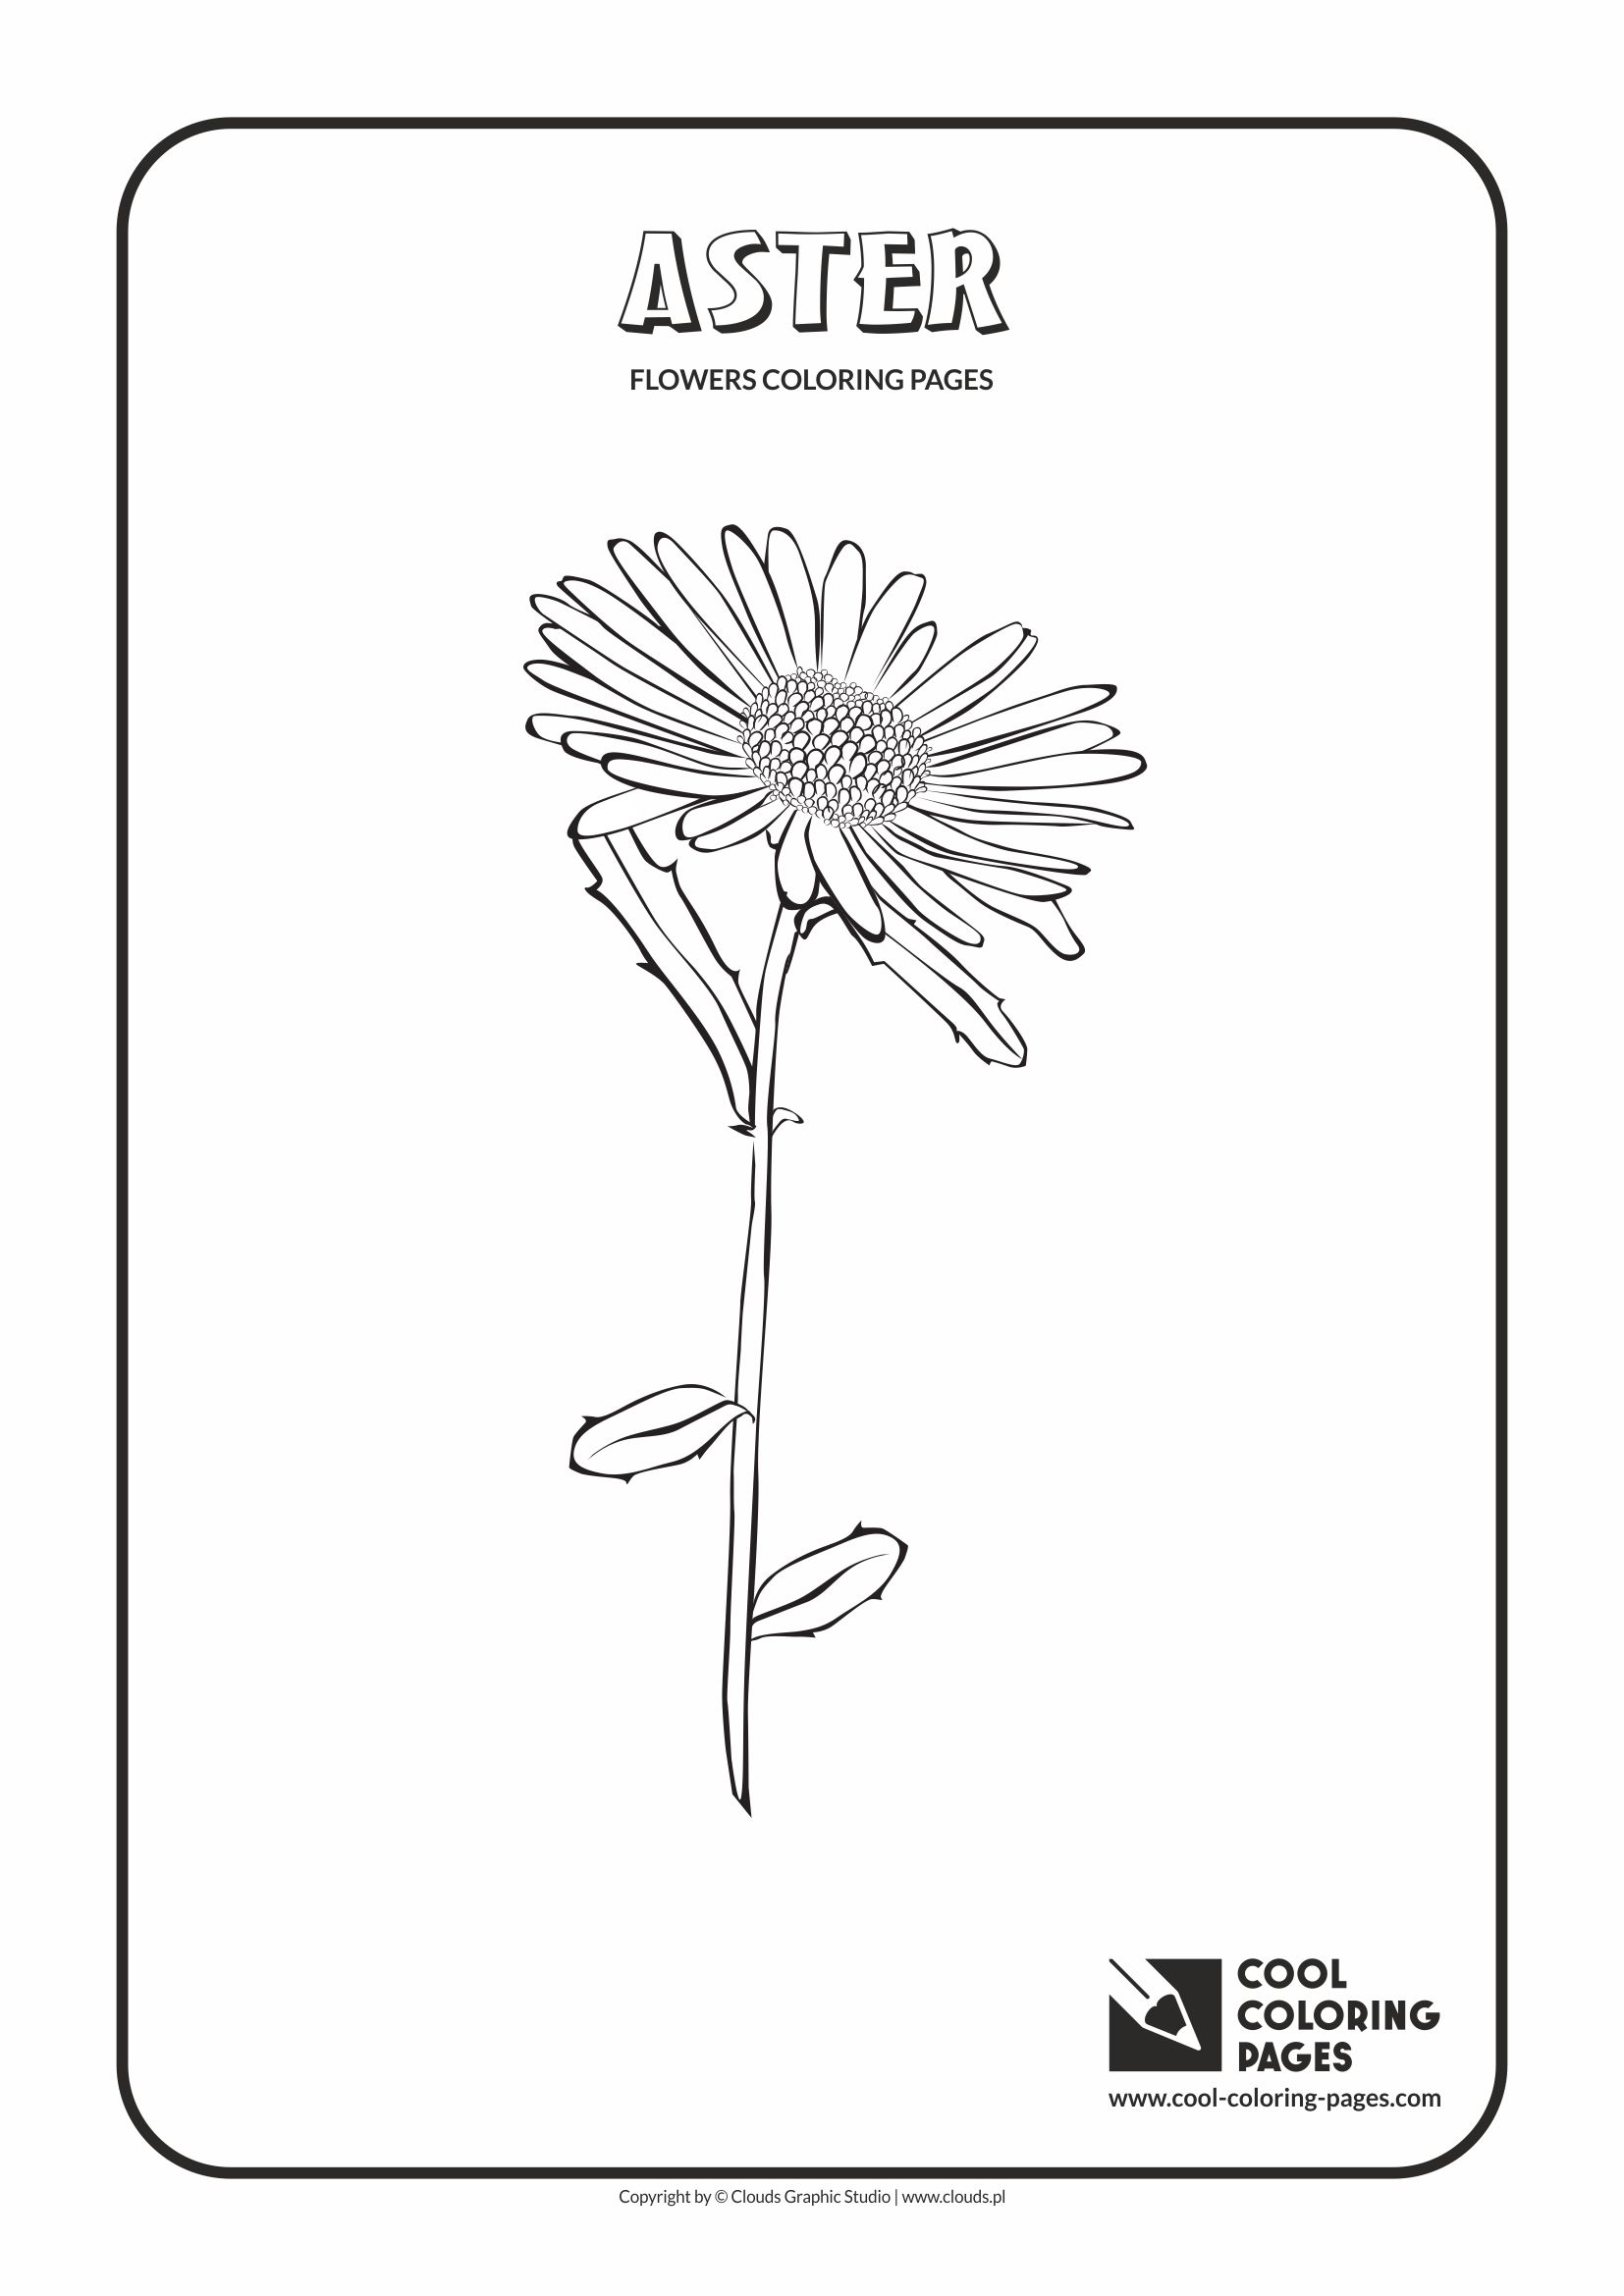 Cool Coloring Pages - Plants / Aster / Coloring page with aster